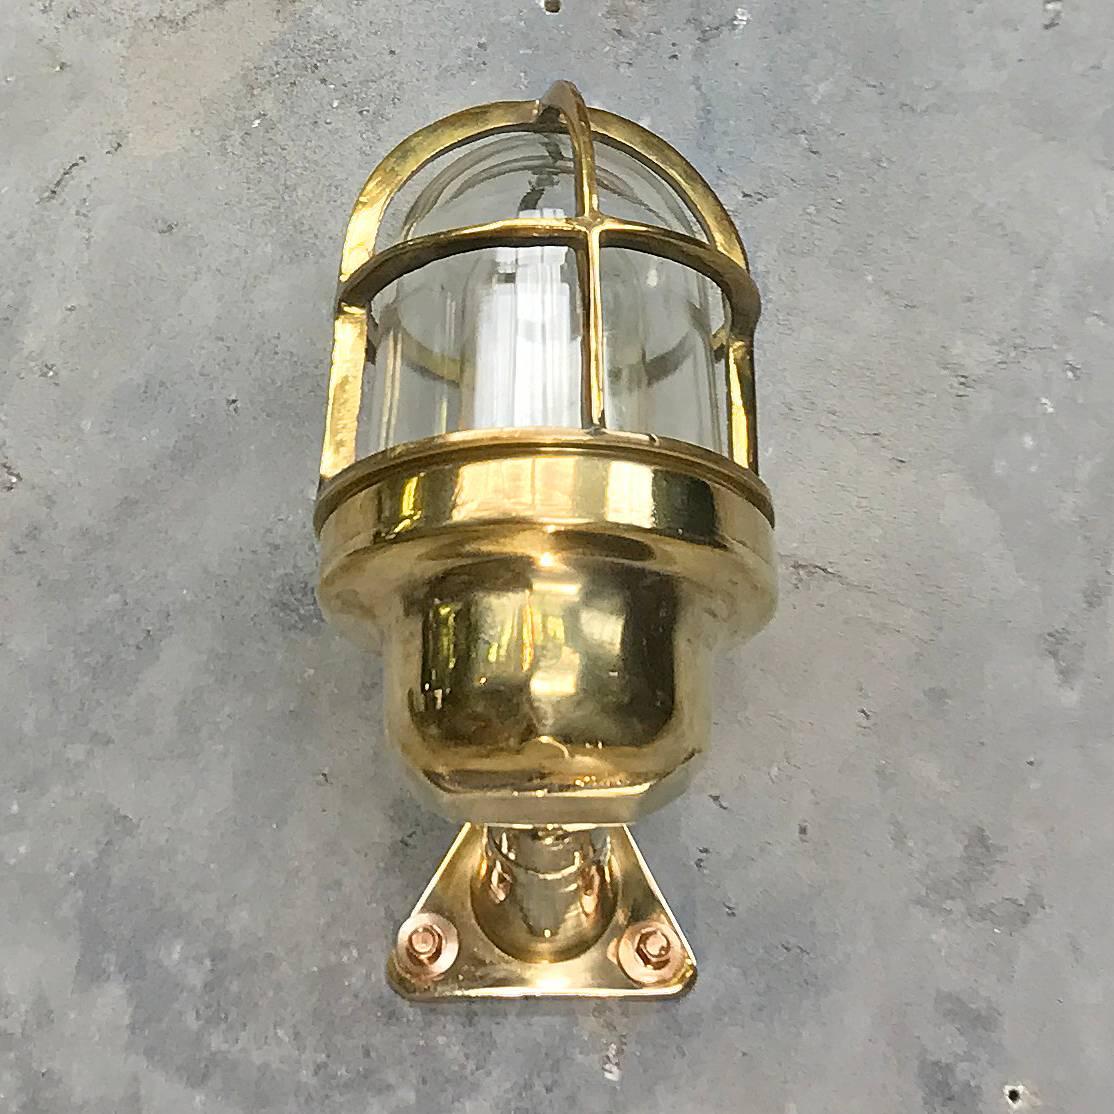 Solid brass cast wall light.

Made by Wiska - manufacturer of marine grade fixtures and components.

These lights were salvaged from cargo ships and supertankers made during the 1970s.

These are versatile fixtures ideal for wet zones and